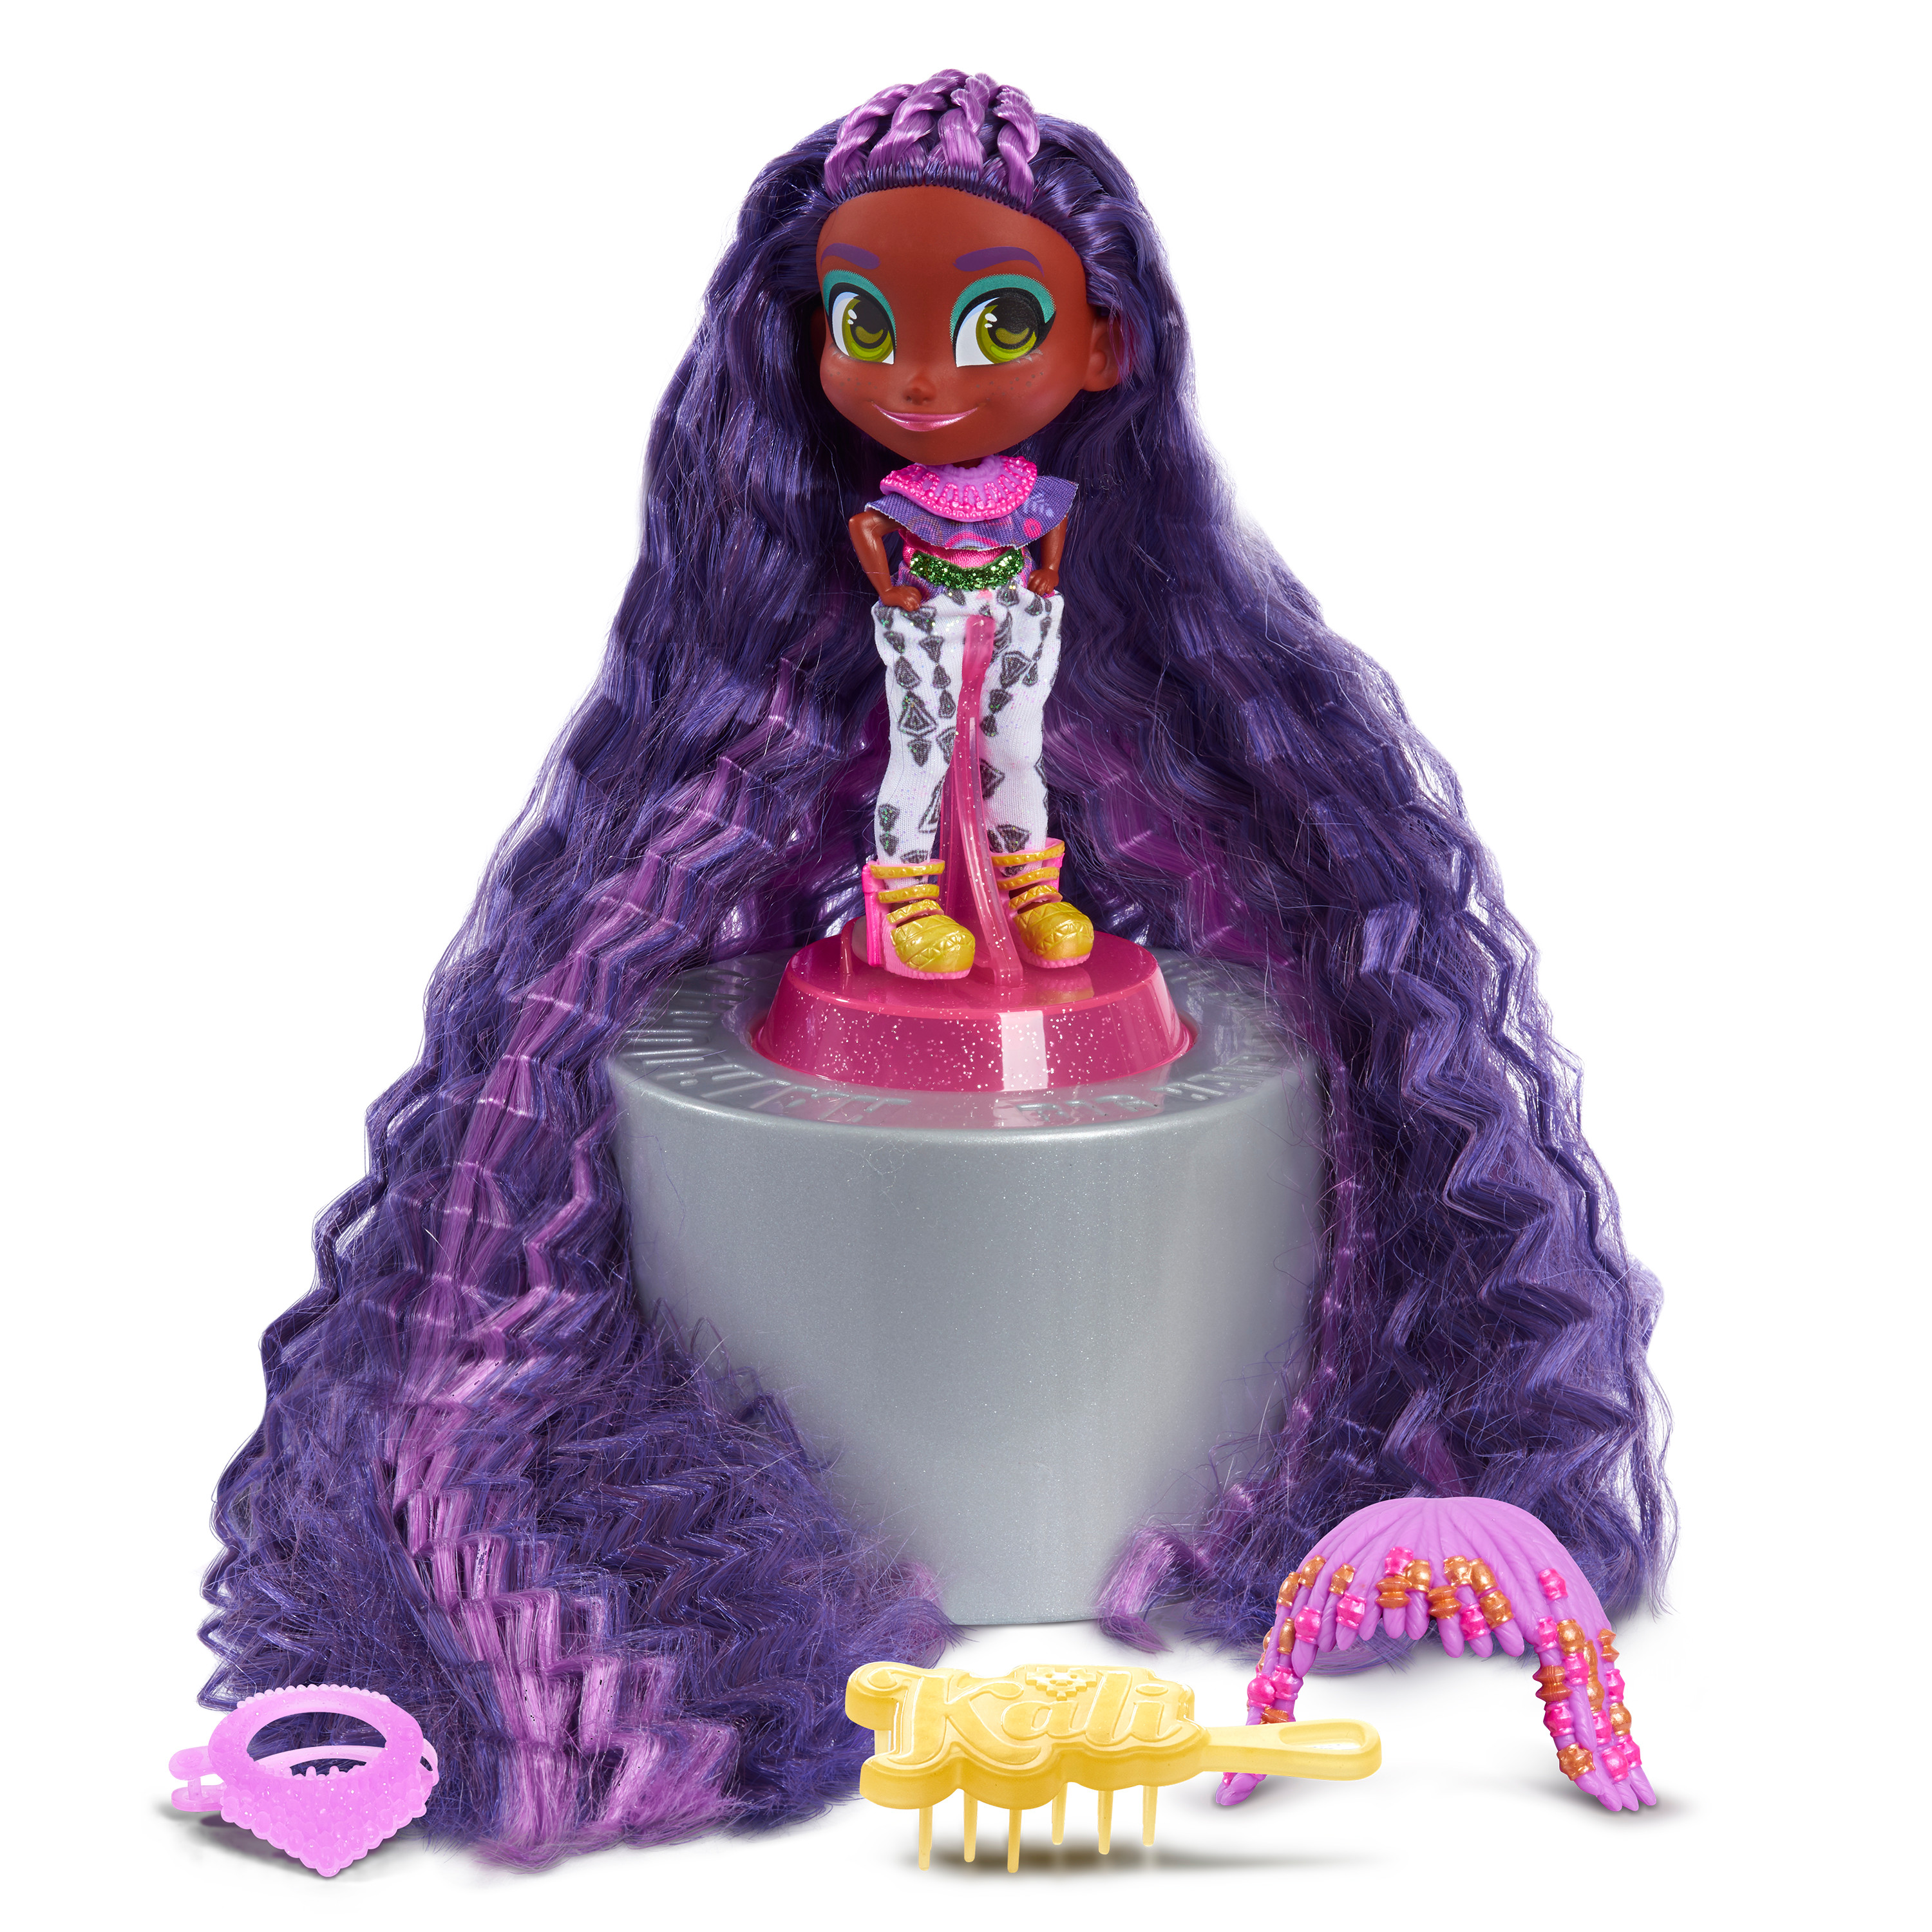 Hairdorables Longest Hair Ever! Kali, Includes 8 Surprises, 10-Inches of Hair to Style, Purple,  Kids Toys for Ages 3 Up, Gifts and Presents - image 3 of 8